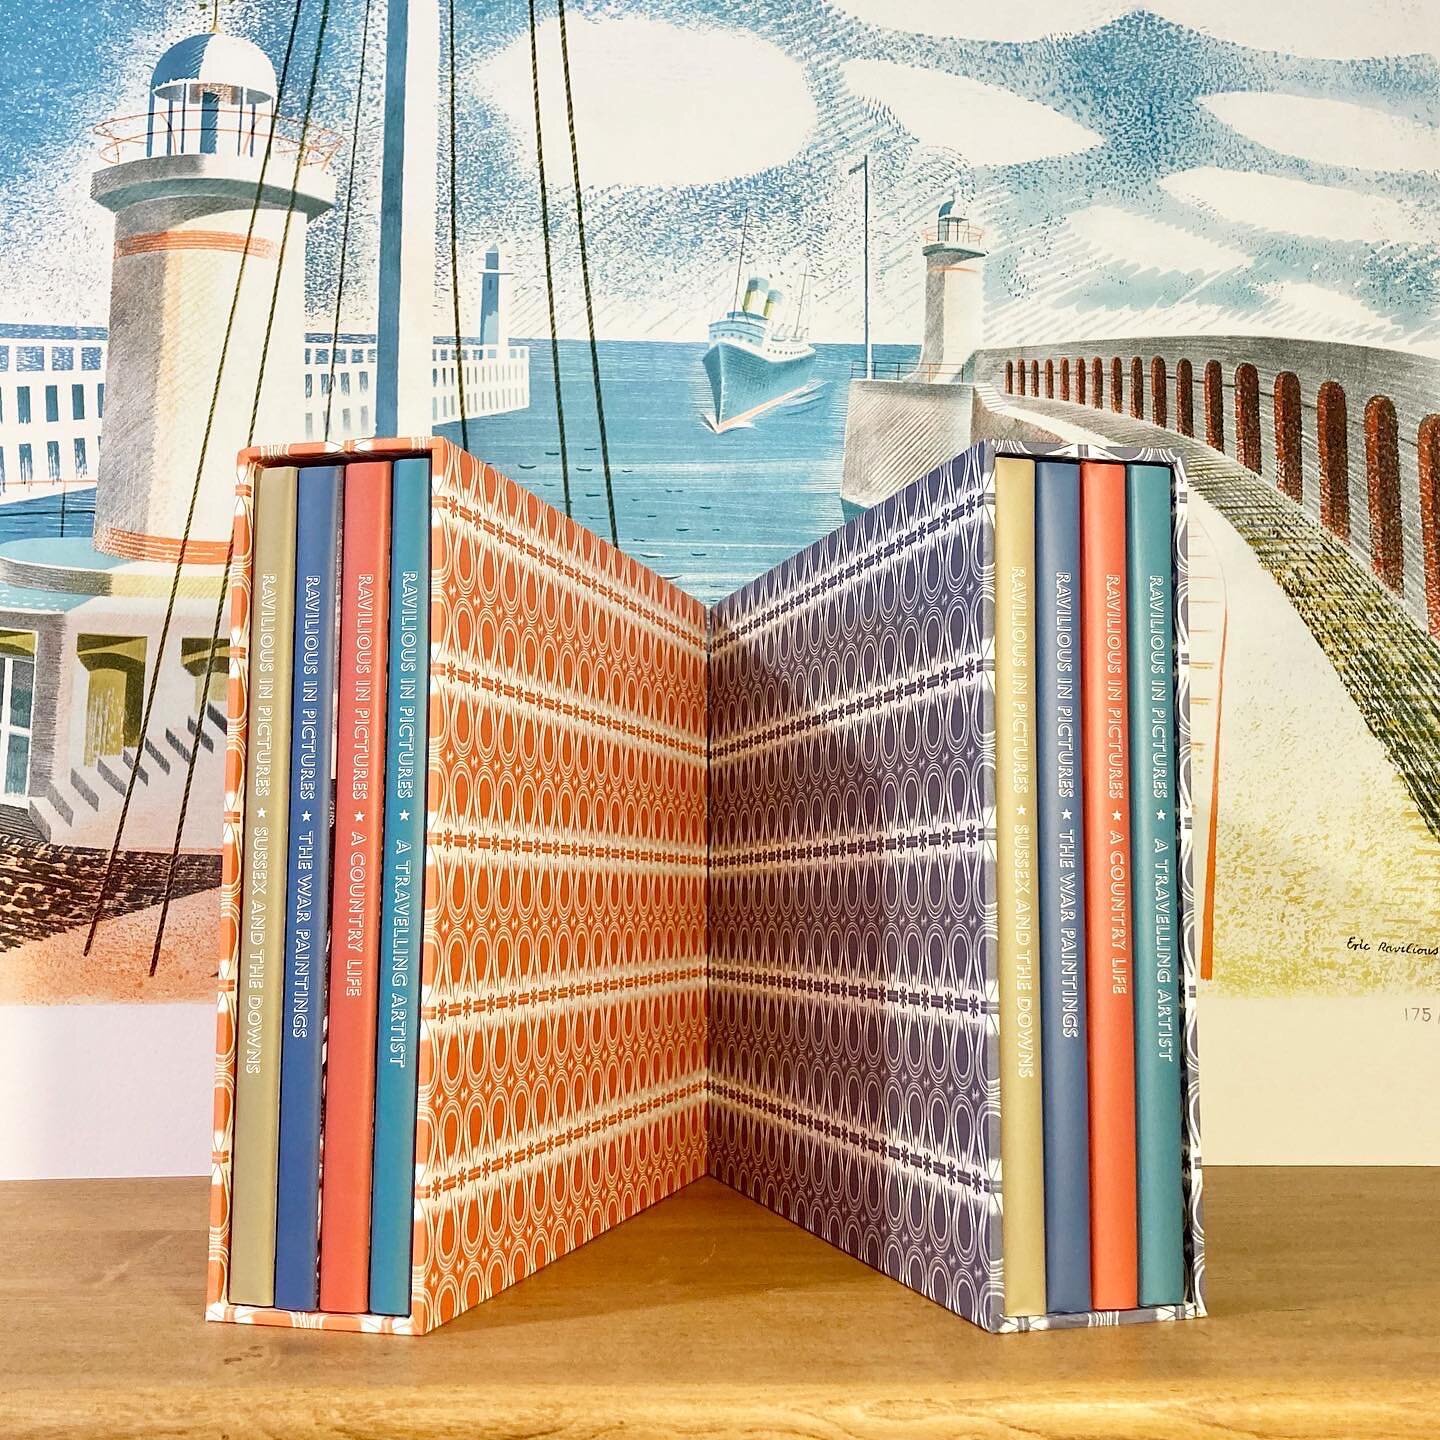 A huge thank you to everyone who has ordered a boxed set of our Ravilious in Pictures Collection. We launched these as a special gift to coincide with the @bloomsburyjamboree Christmas fair and the response has been amazing! 

The boxes are hand made